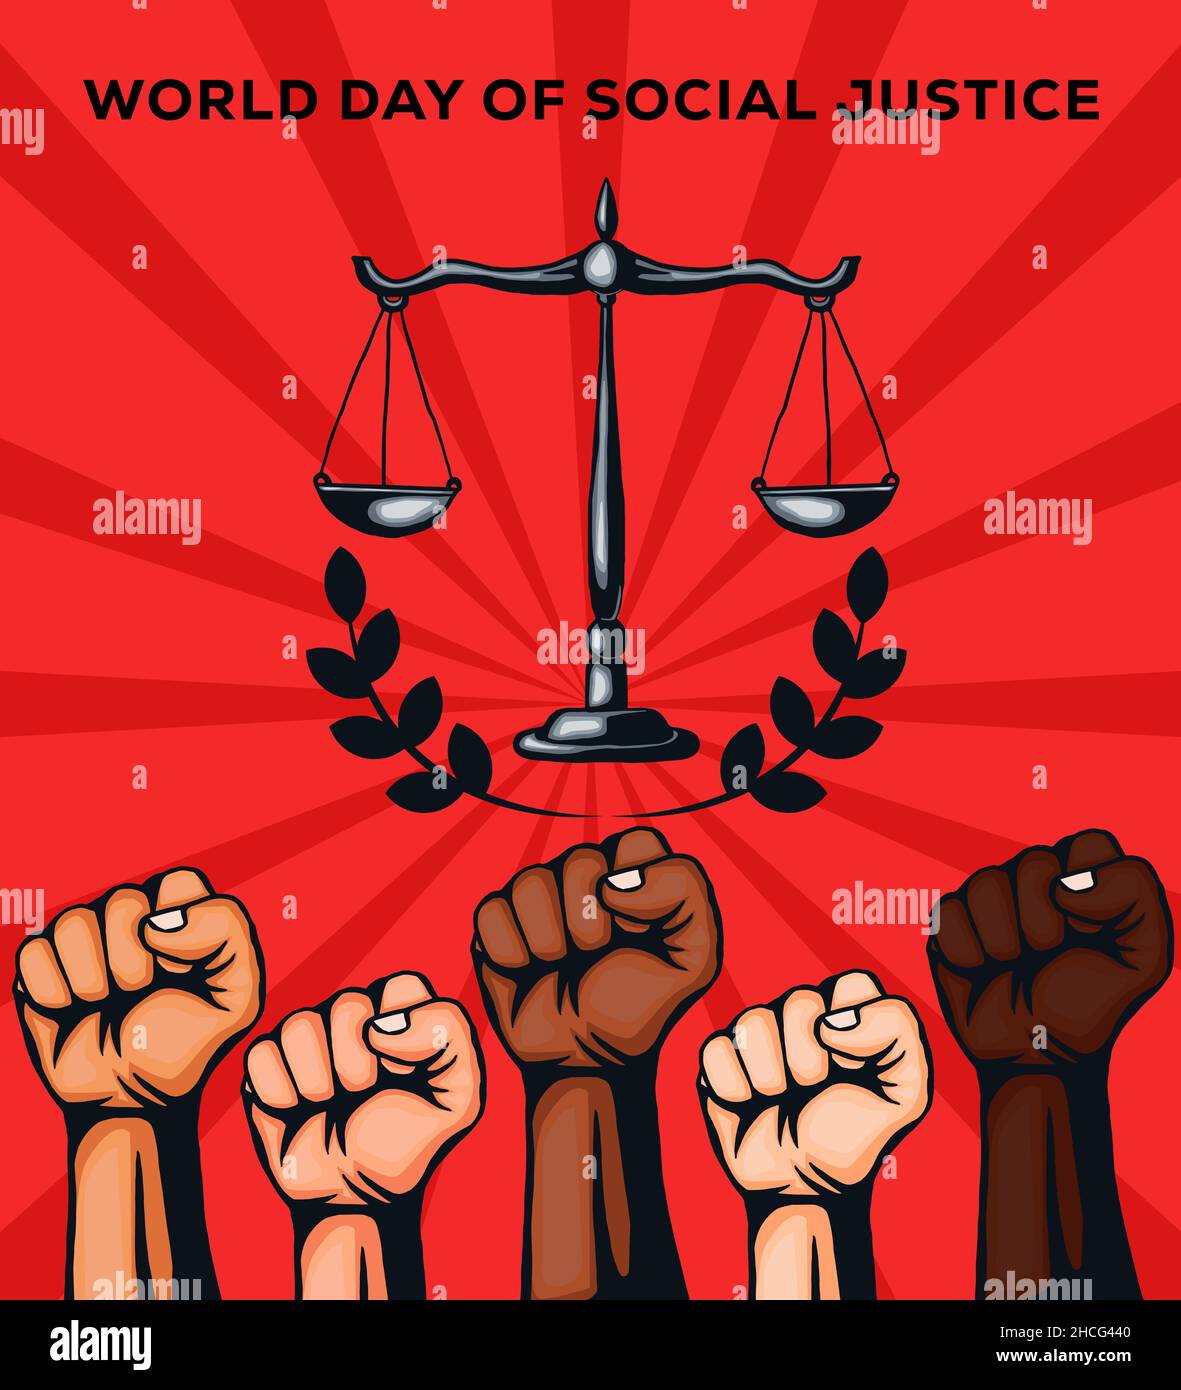 vector design world day of social justice Stock Vector